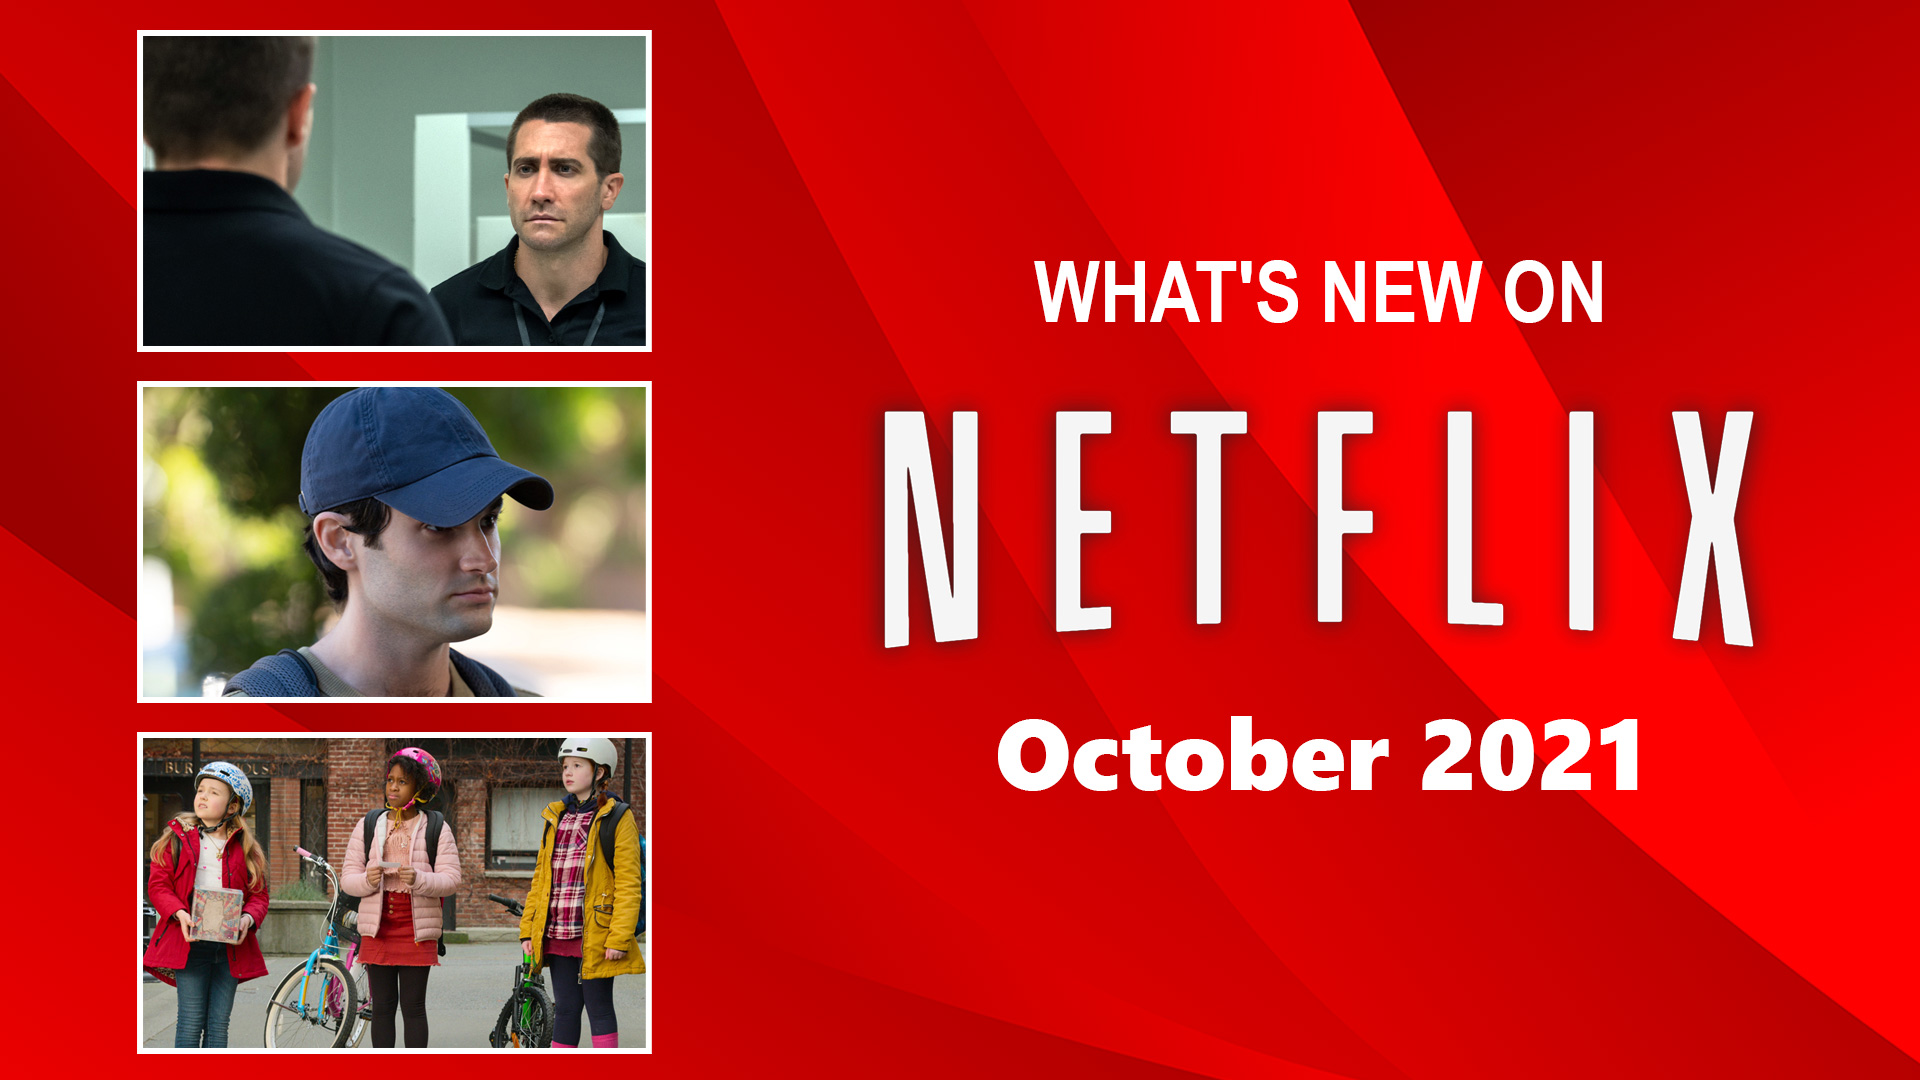 What's New on Netflix October 2021